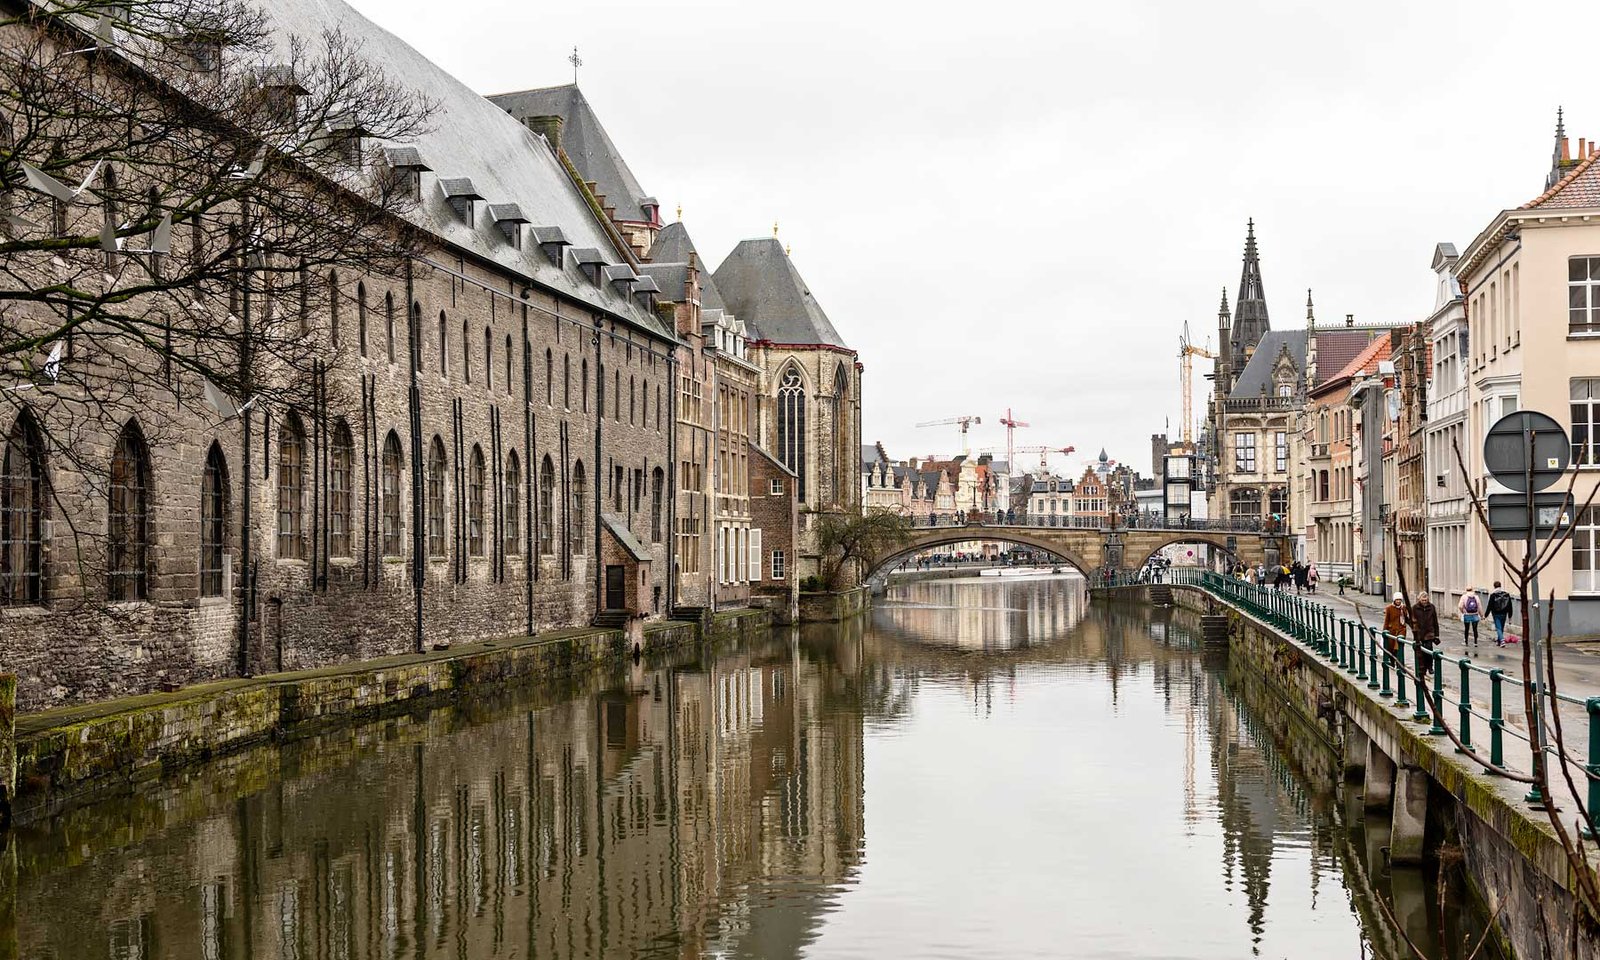 PICTURE PERFECT GHENT & FALLING IN LOVE WITH HOTEL 1898 THE POST